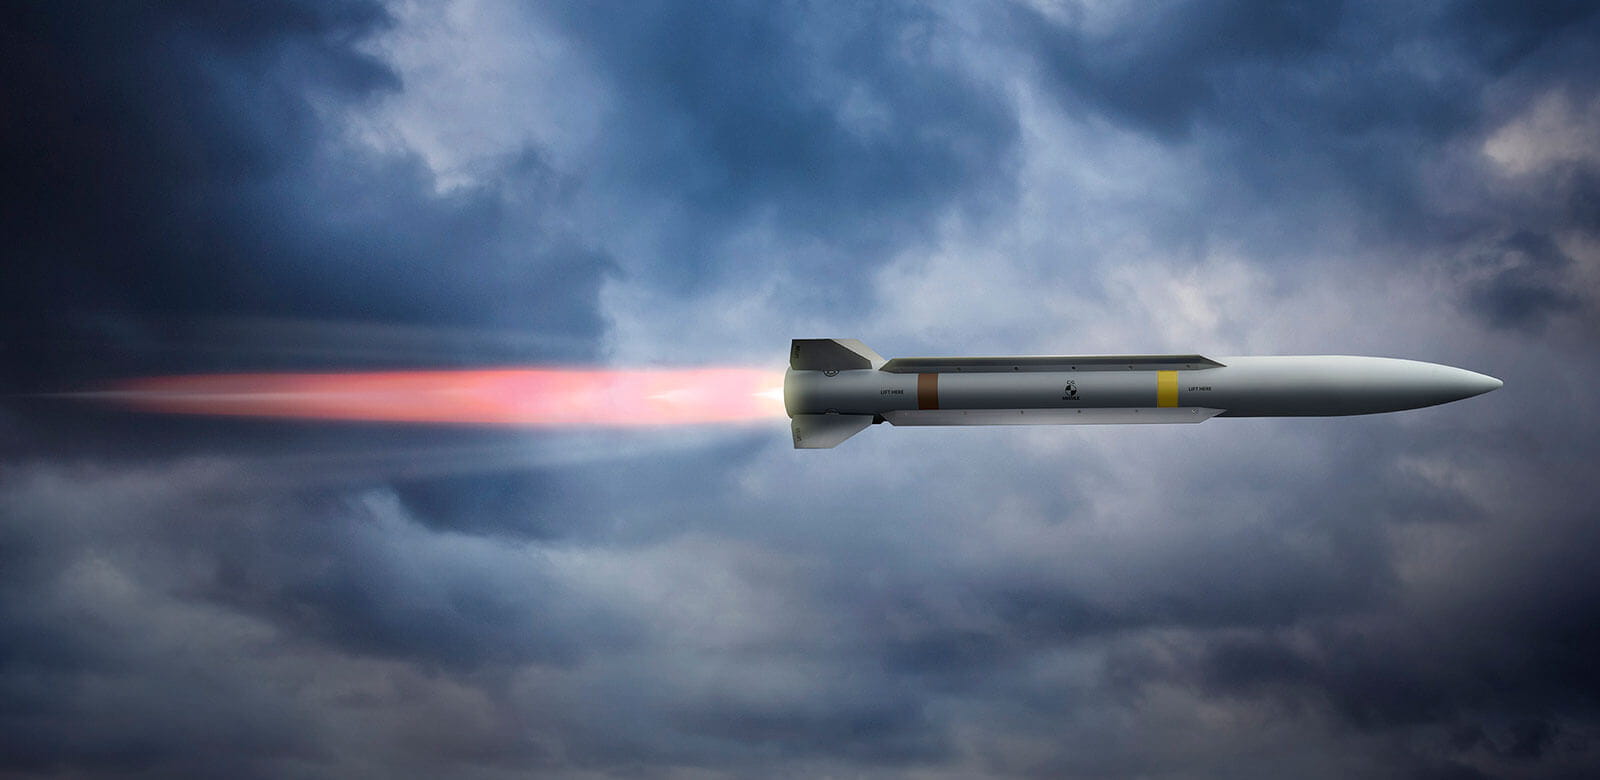 Artistic rendition of a Peregrine Air-to-Air Missile